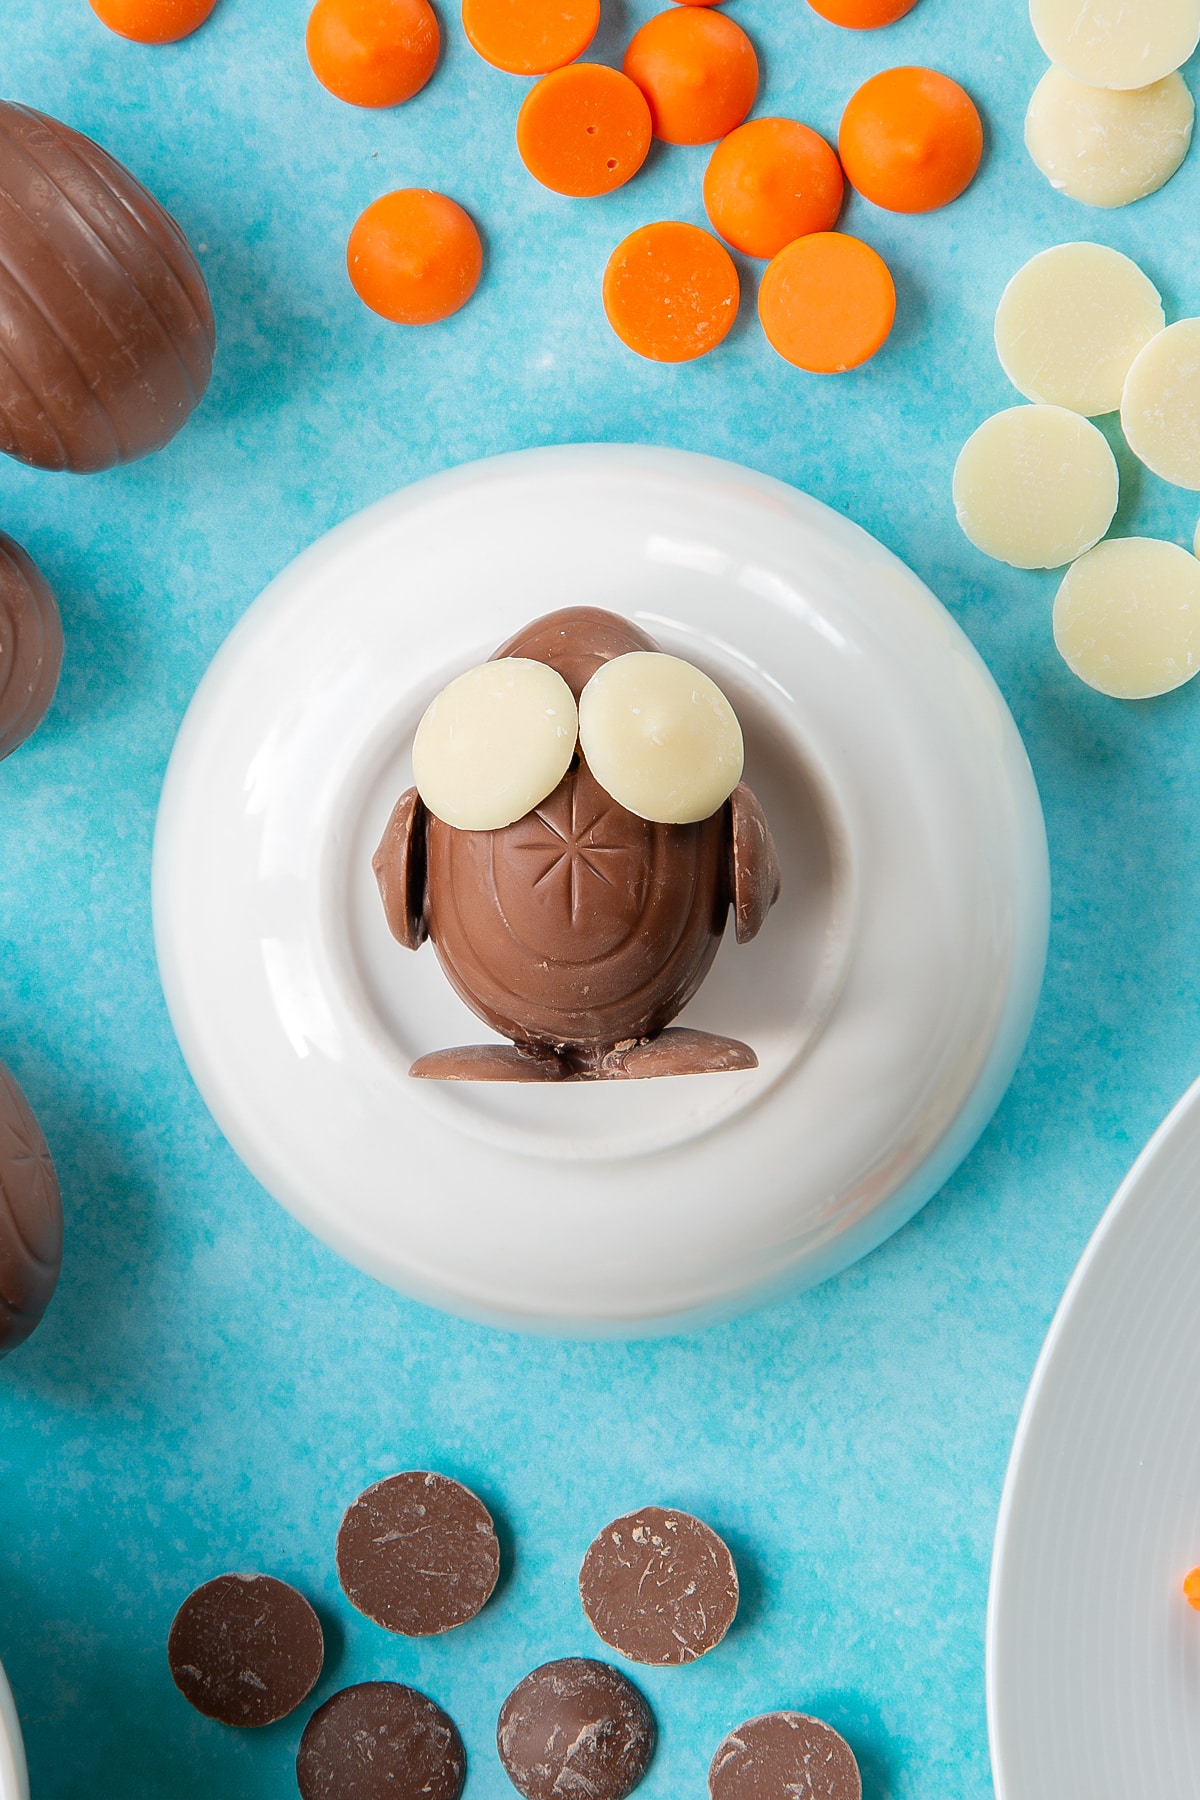 Two chocolate buttons stuck to the bottom of a creme egg to resemble feet. The egg lays on an upturned white bowl. Two more chocolate buttons are stuck to the sides of the egg to resemble wings, while two white chocolate buttons form eyes. The bowl is surrounded by ingredients to make chocolate chicks.